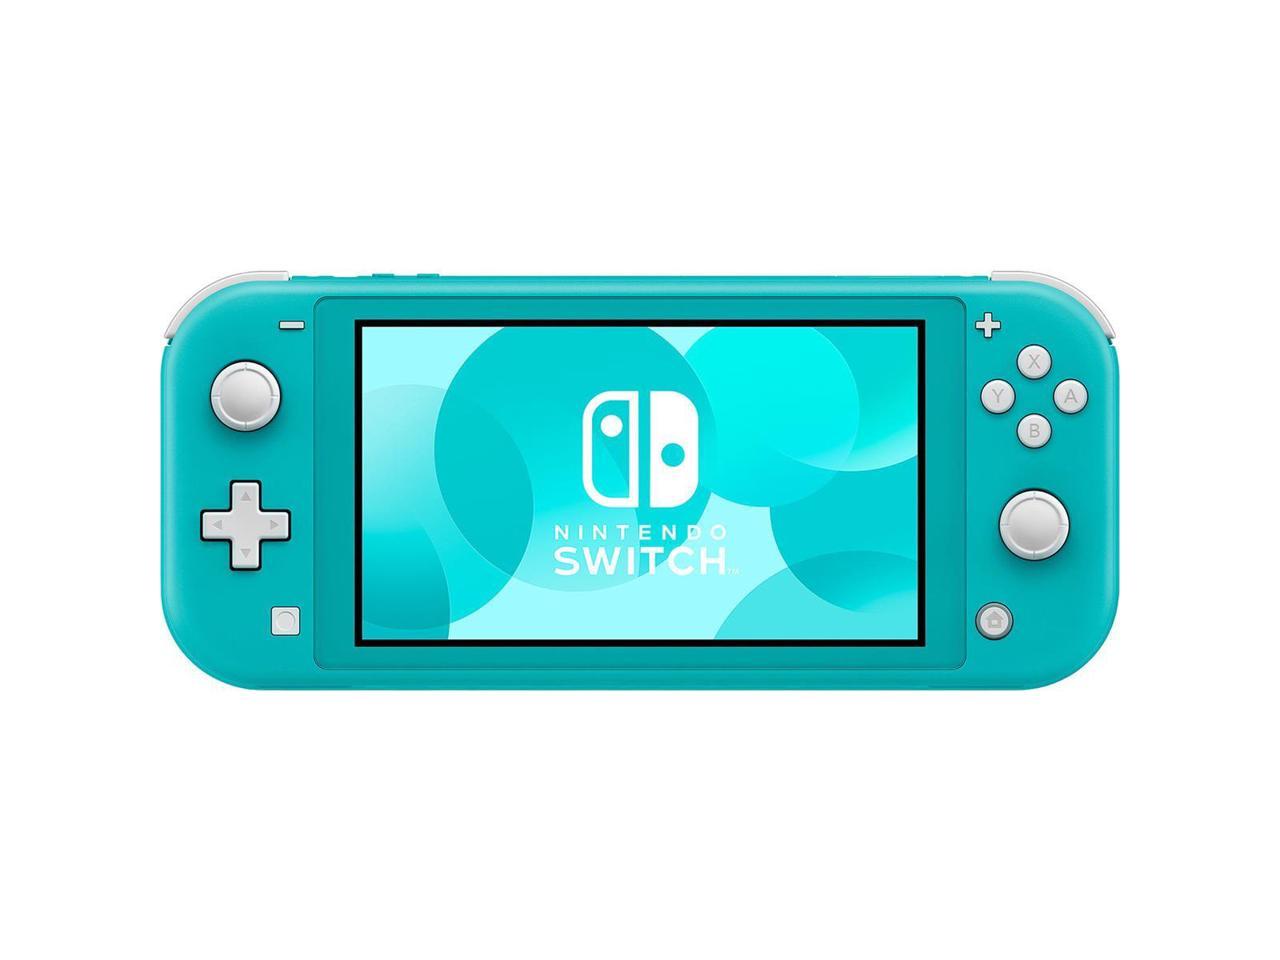 Refurbished Nintendo Switch Lite Hdhsbazaa 5 5 Inch Lcd Touch Screen Handheld Game Console Turquoise Newegg Com